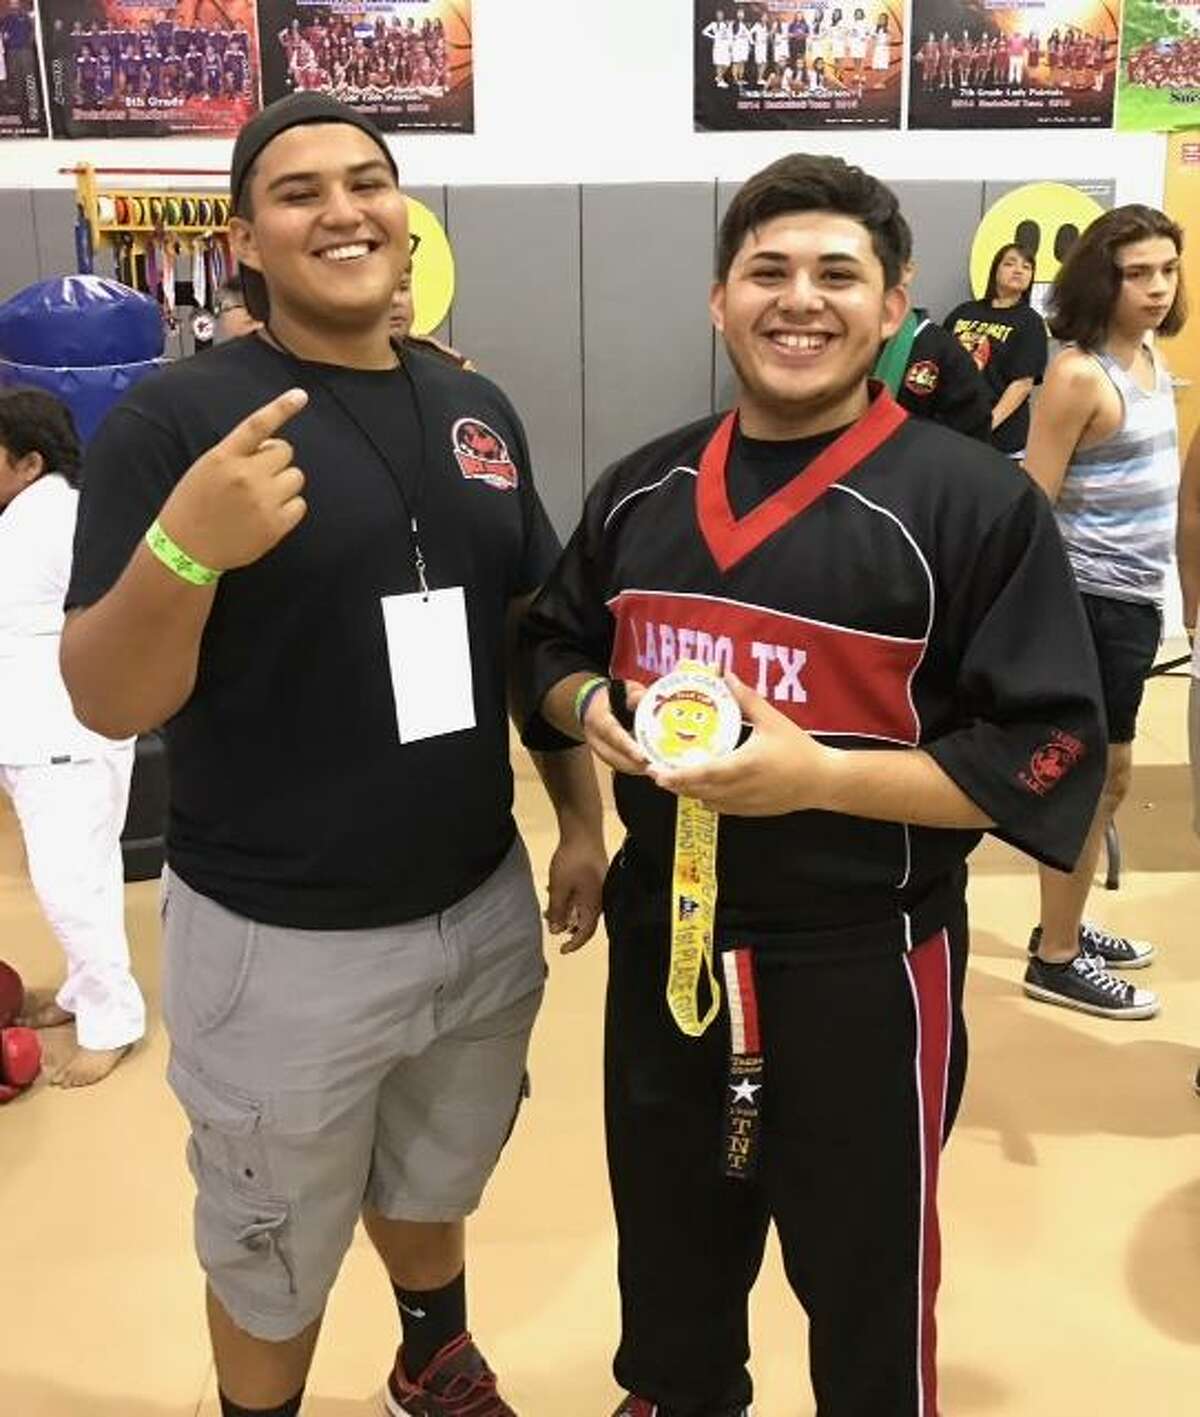 Led by coach Brian Gutierrez, left, the Team Guerra tournament karate team competed at the Gulf Coast Karate Championships in San Benito. Branden Gutierrez is one of its 15 team members as every one medaled.